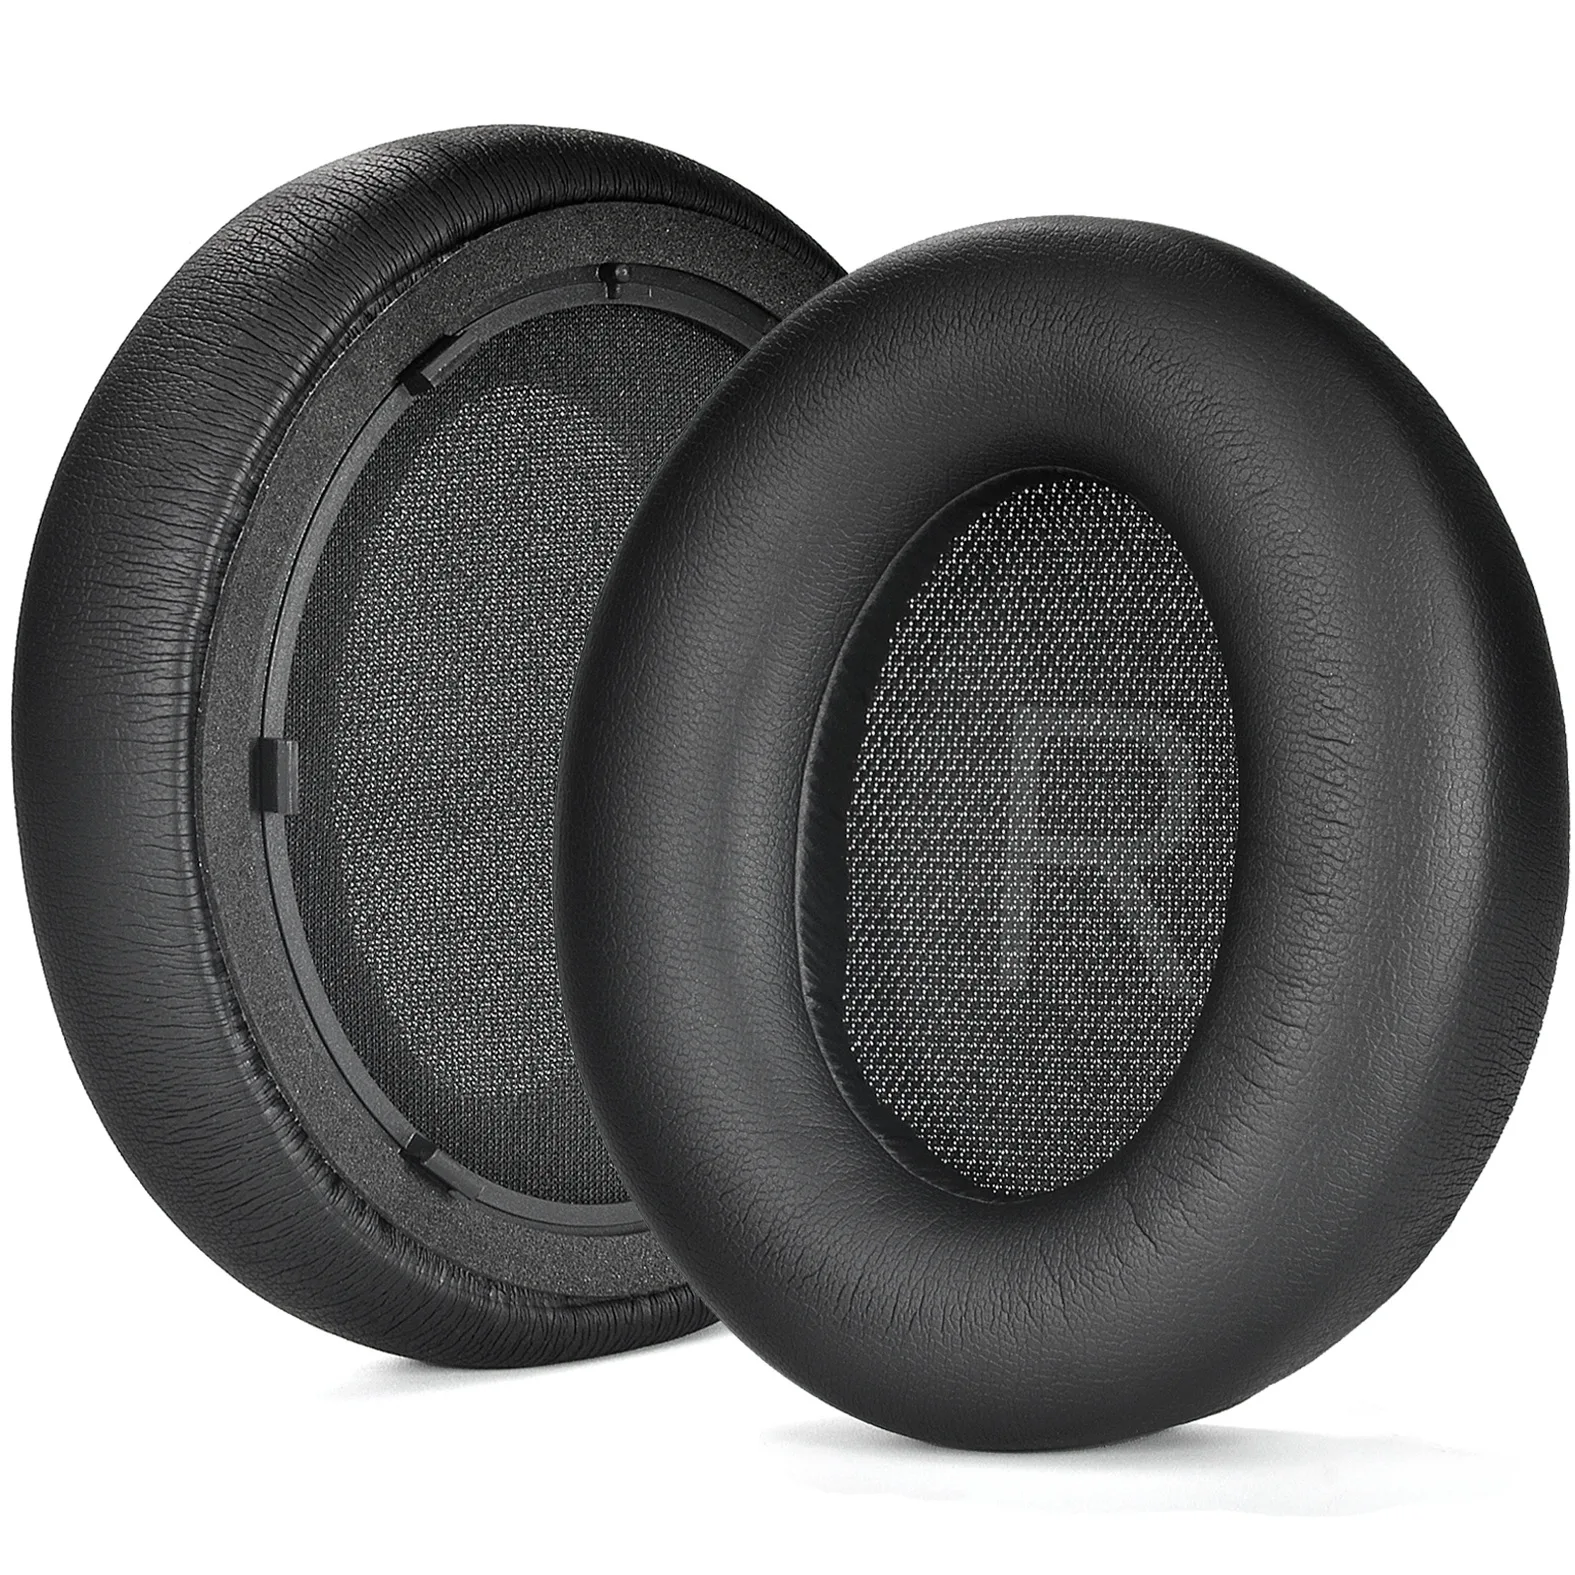 

Black Protein Skin Ear Pads For Anker Space Q45 Headphones Memory Foam Cover High Quality Earpads 7.05